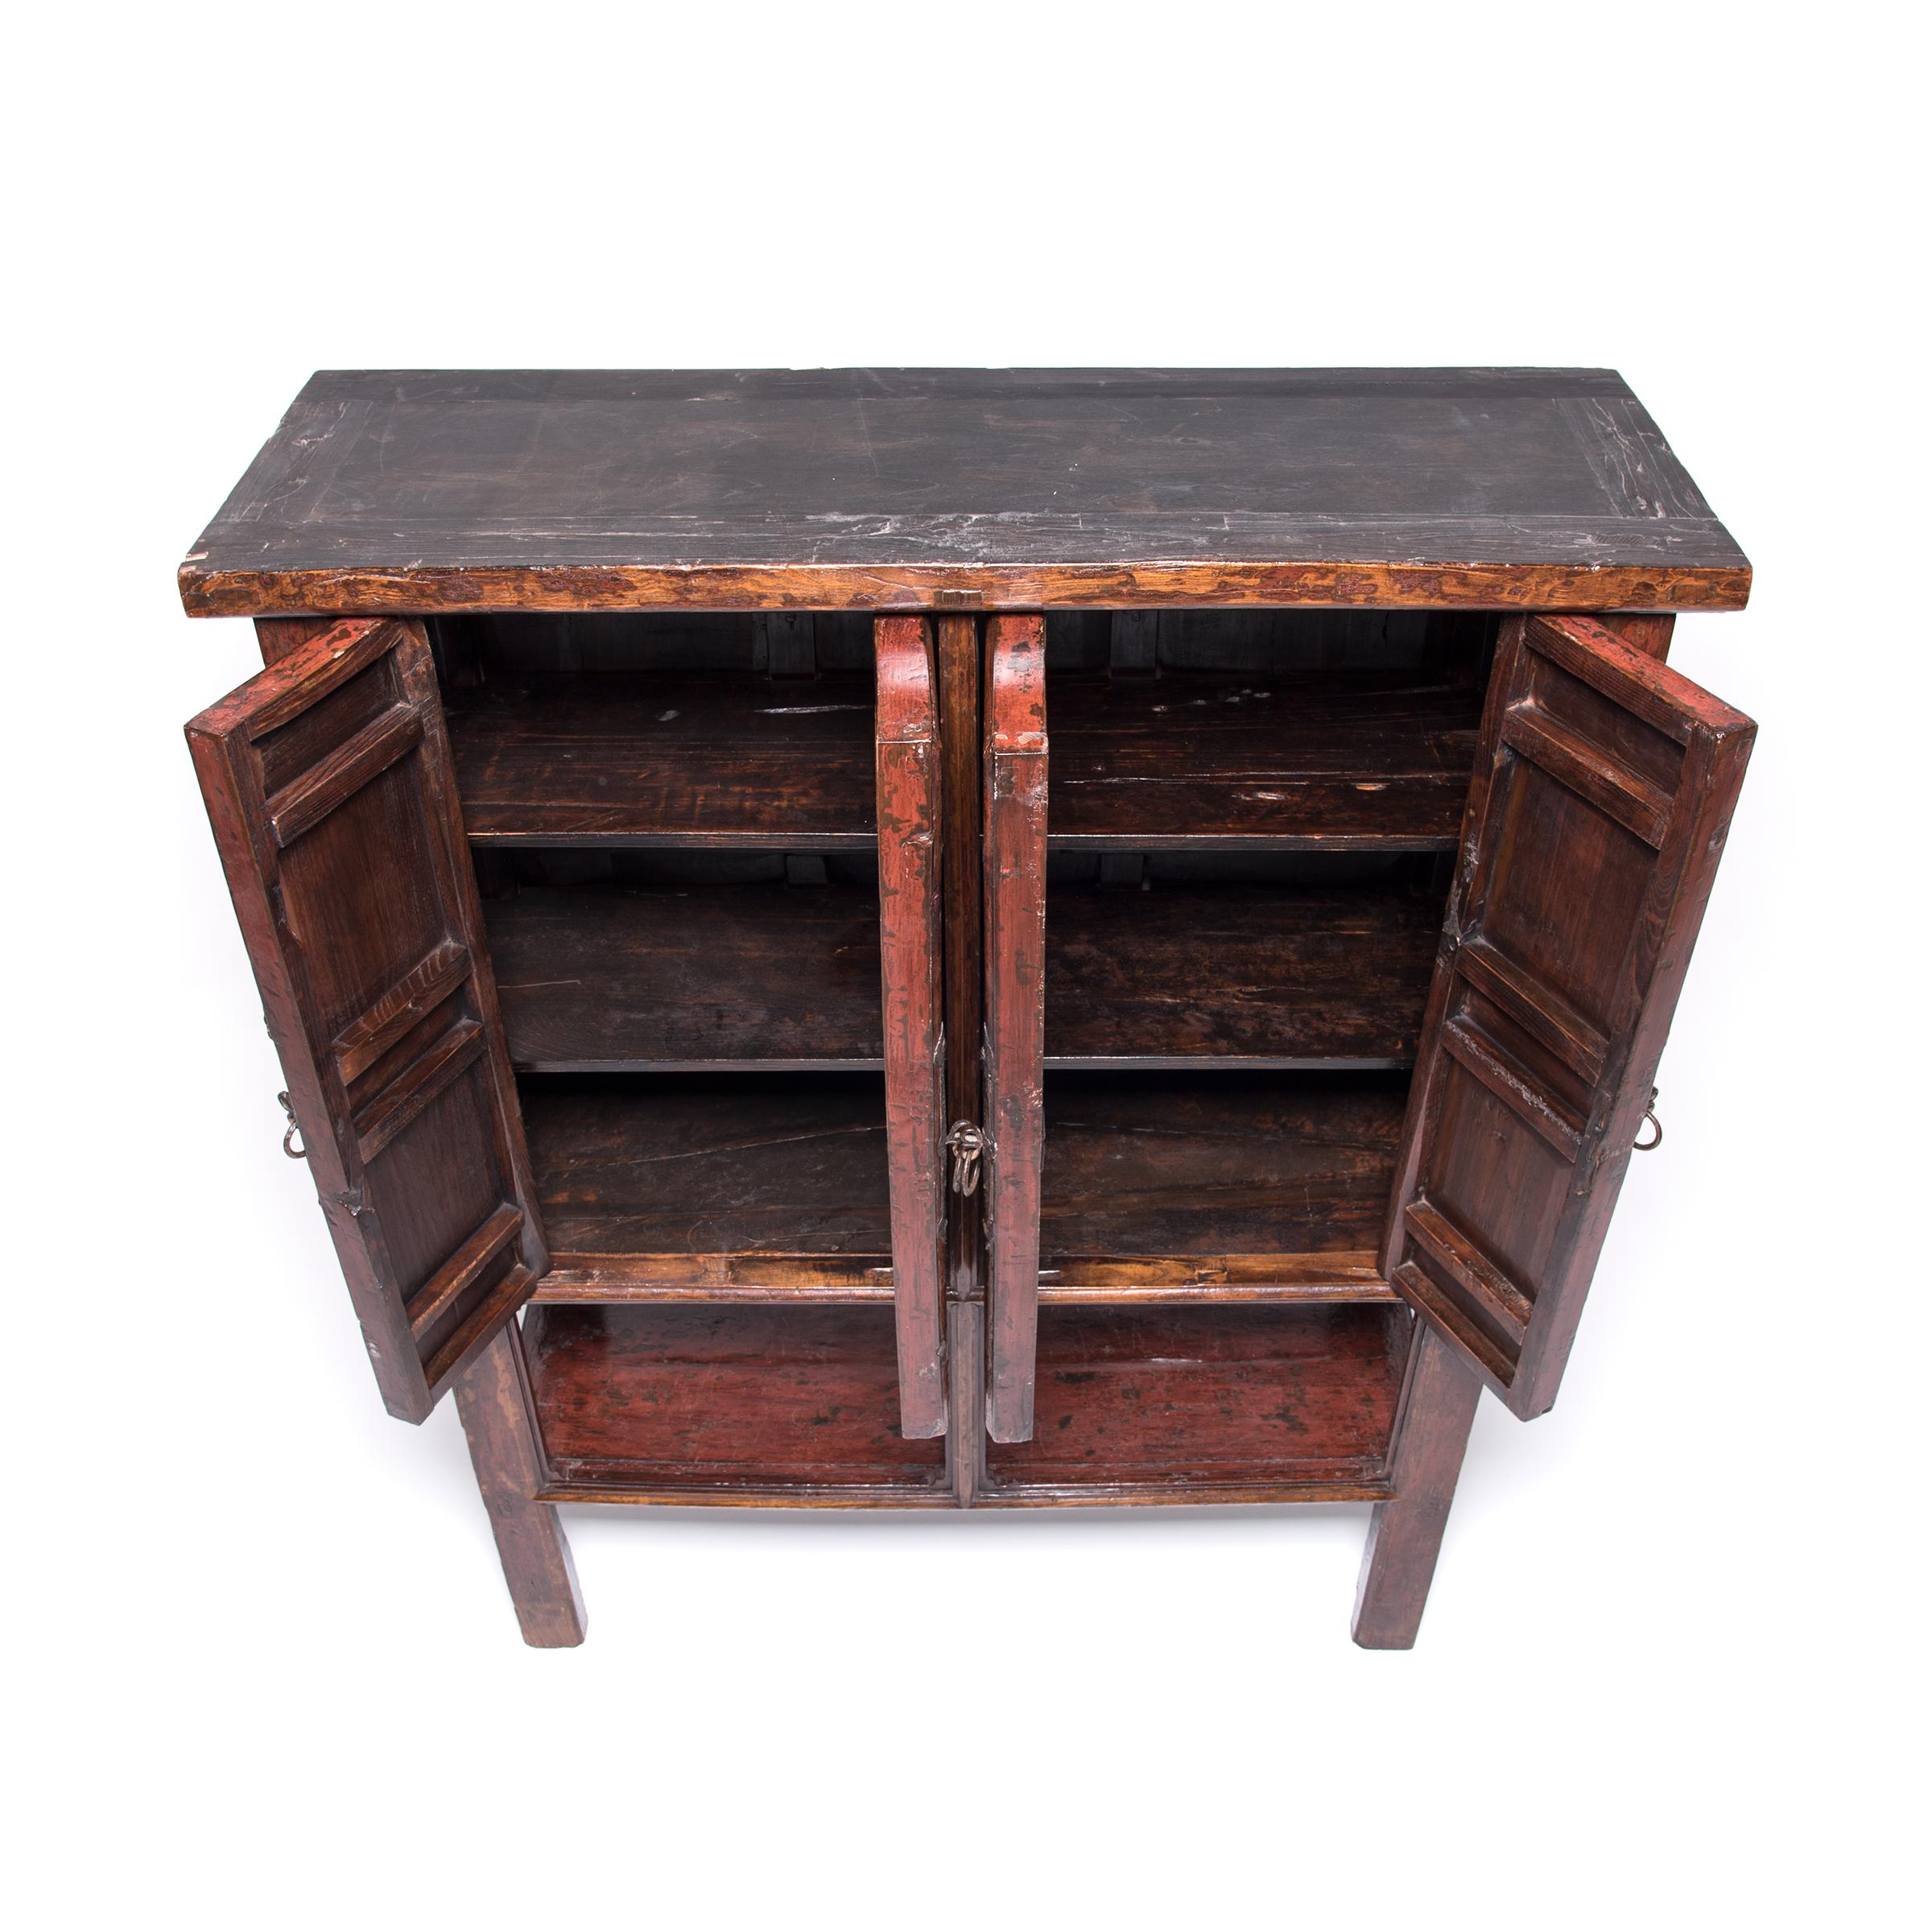 Iron Provincial Chinese Cabinet with Open Shelf, c. 1850